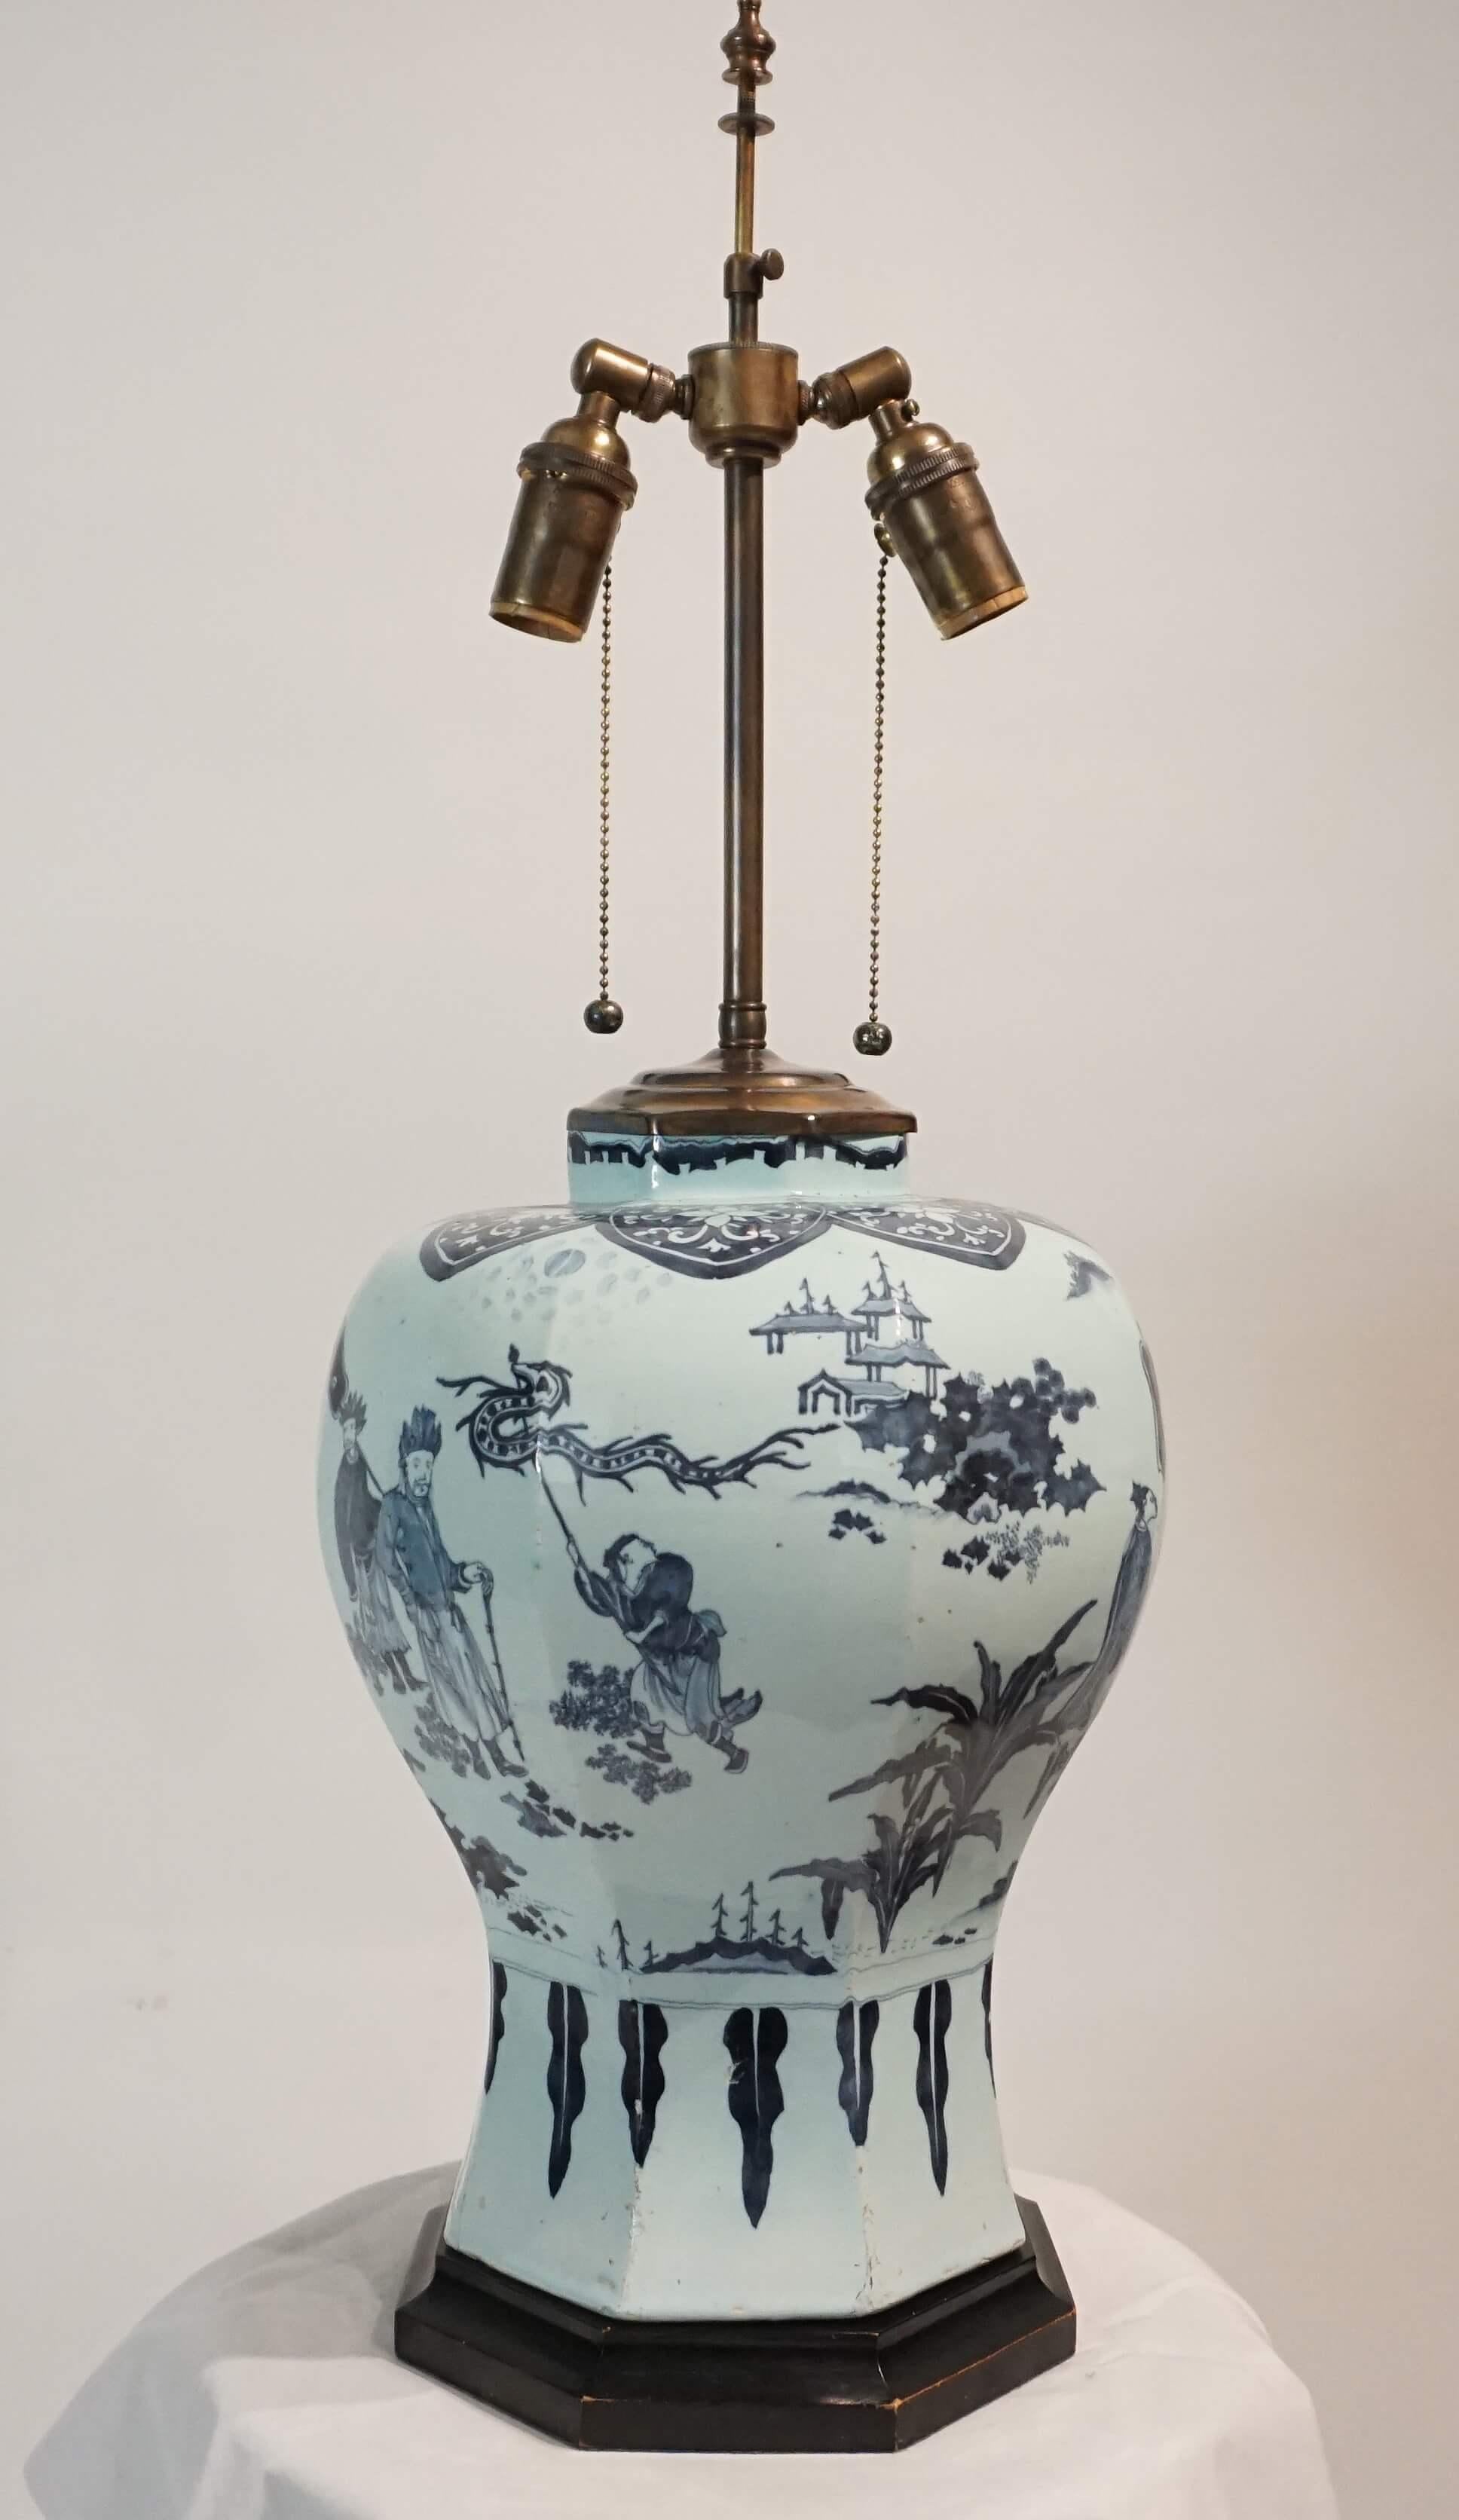 Painted Blue and White Dutch Delft Chinoiserie Baluster Vase Table Lamp, circa 1670